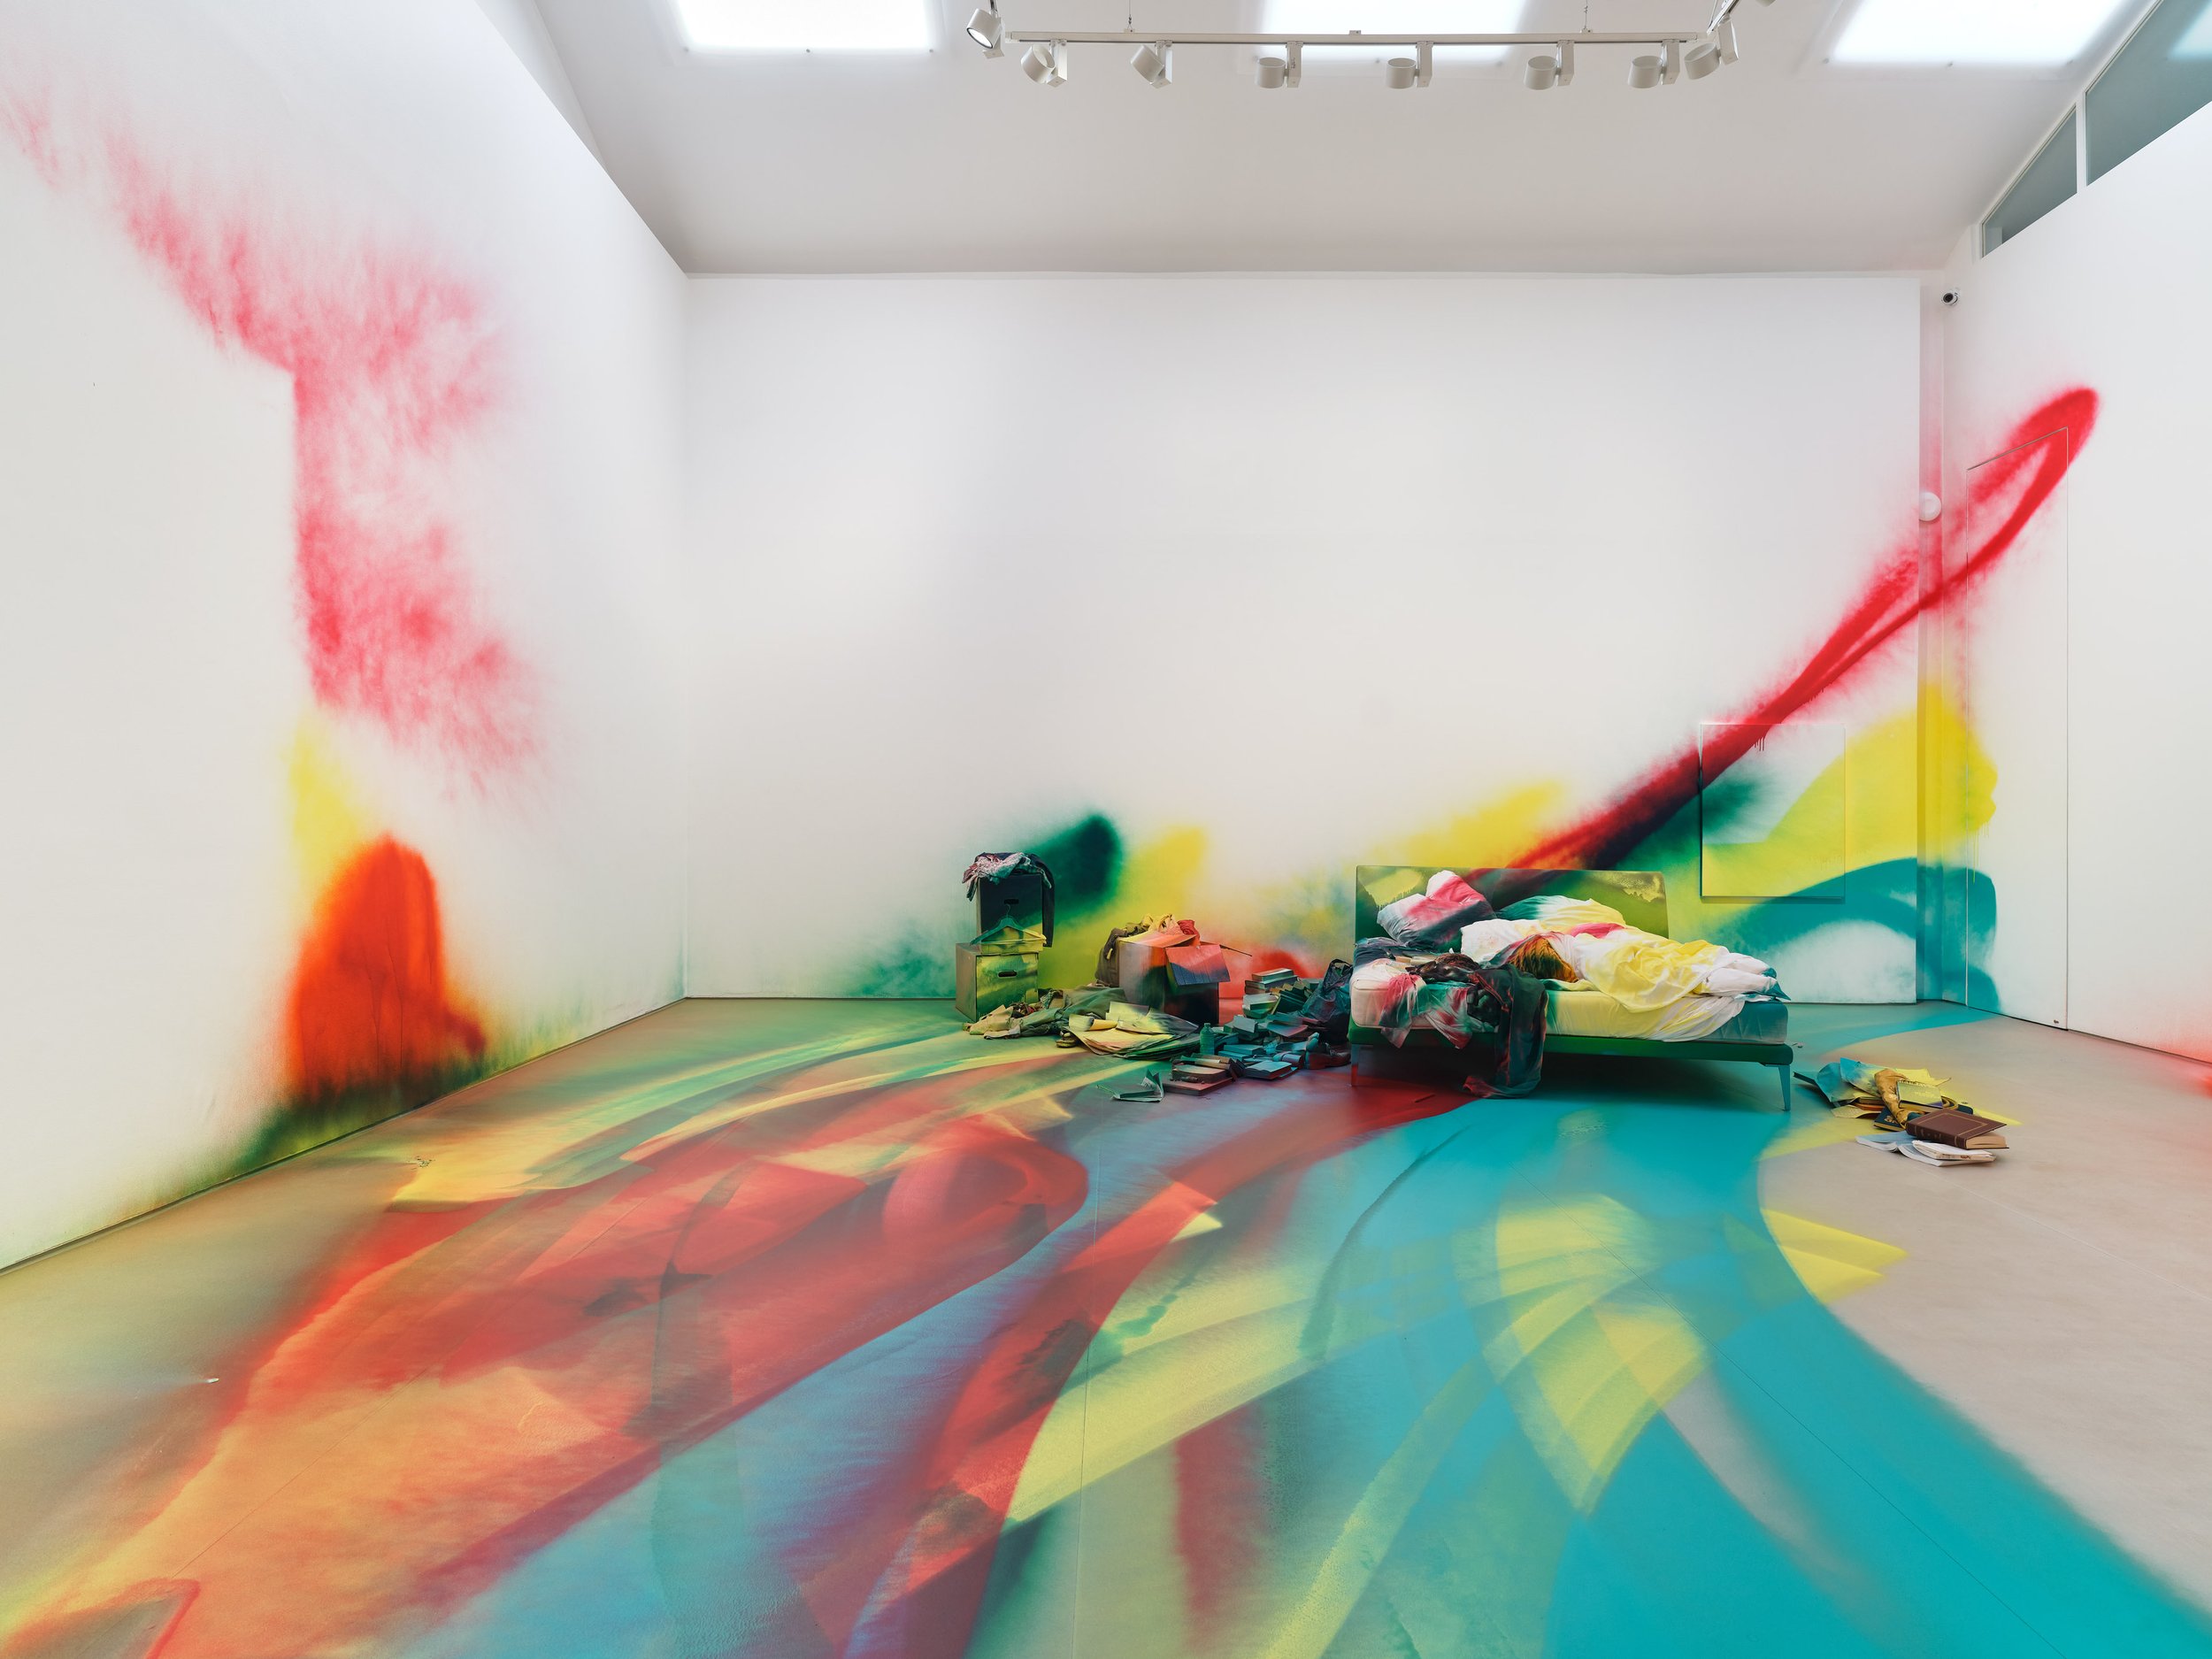 At the Louis Vuitton Foundation and in Venice with Katharina Grosse, colour  leaps off the canvas